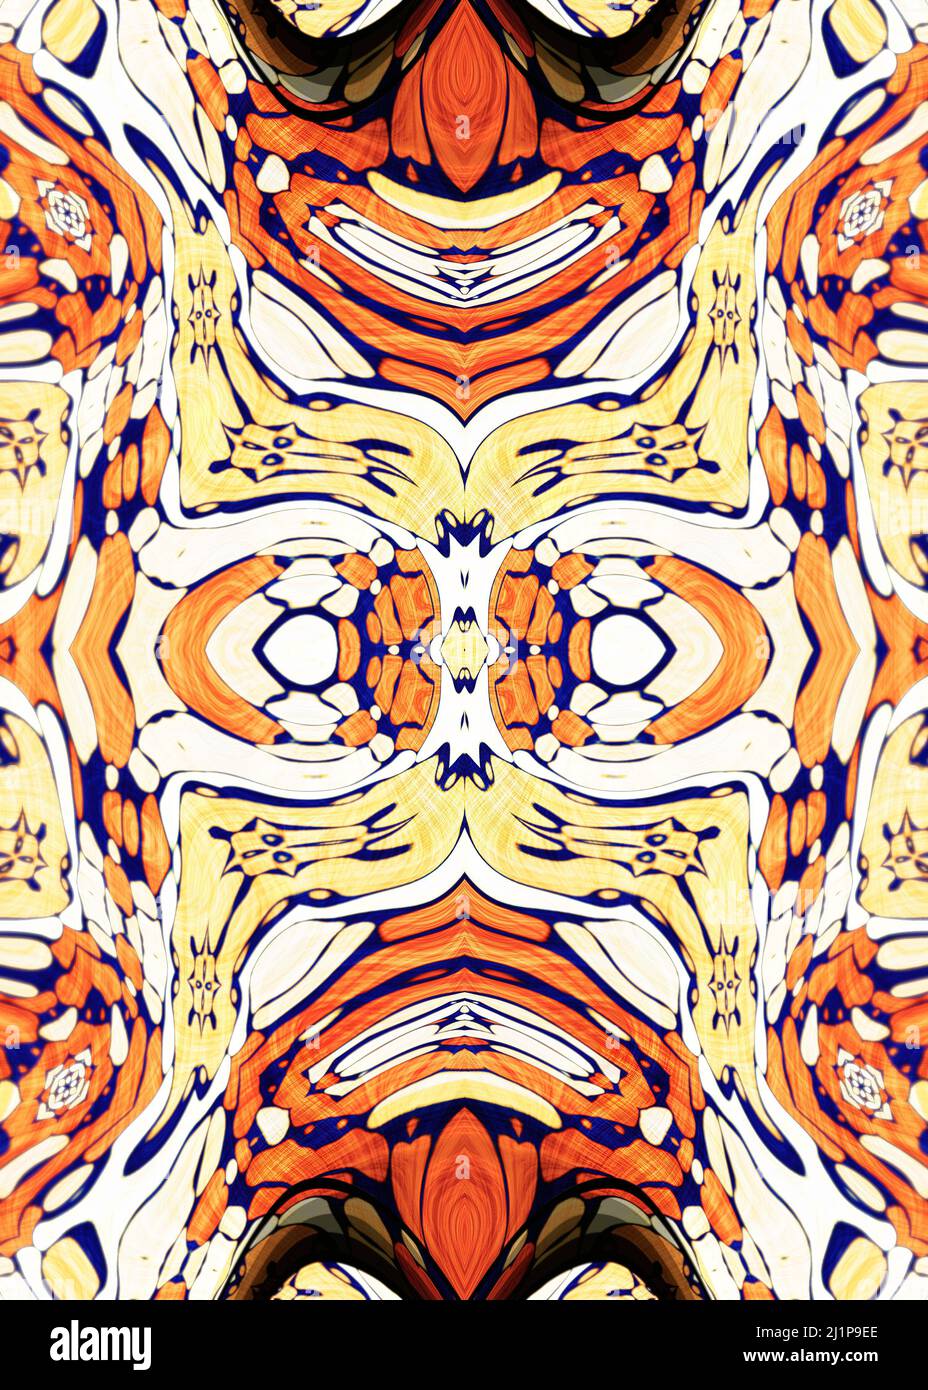 Evil demonic smiling creatures (heads, faces) inside a kaleidoscopic mandala painting. Retrowave vibes and colors. Stock Photo